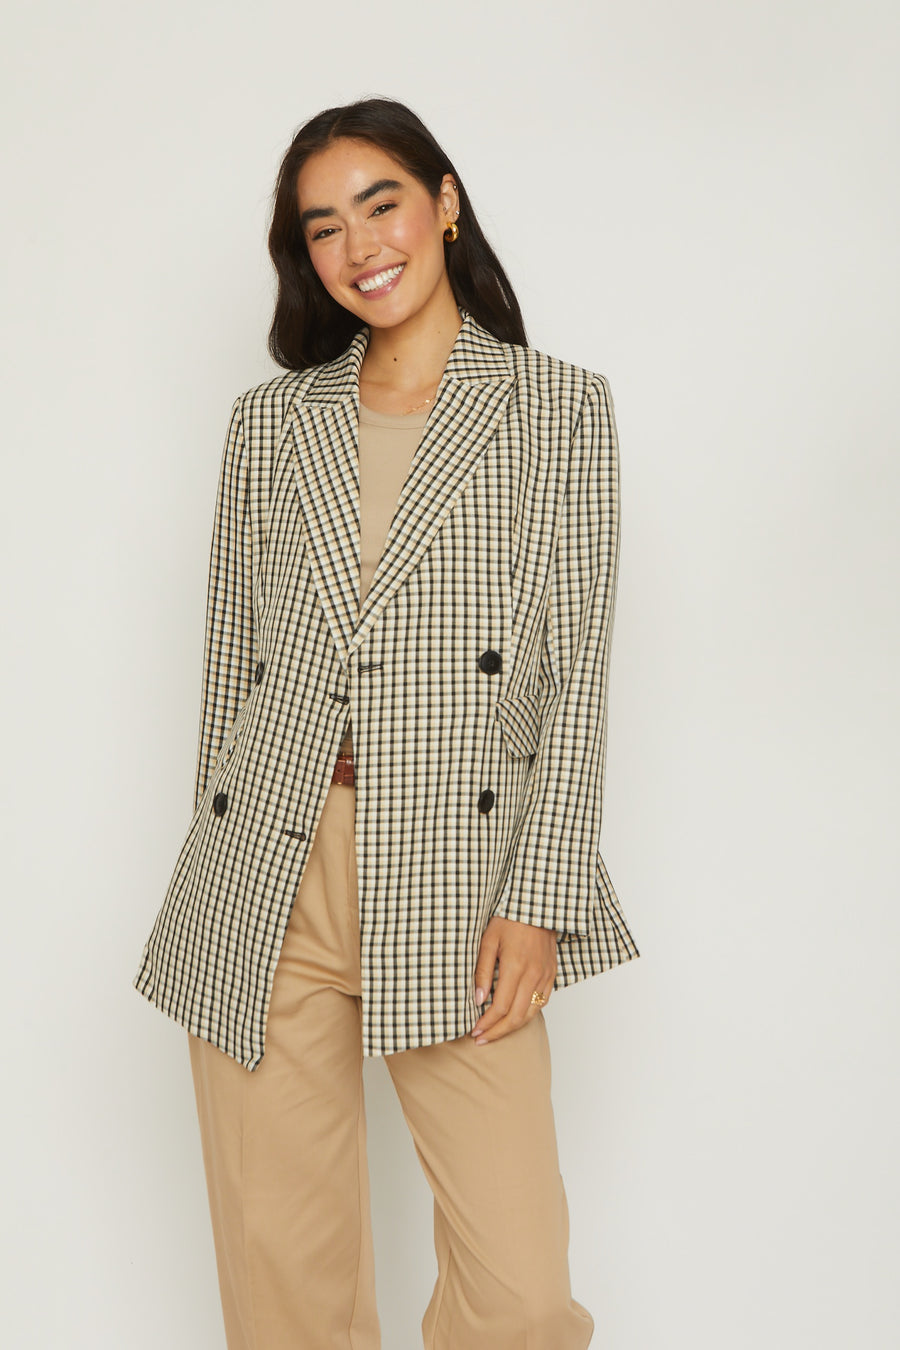 No Srcipt image - Images of 4 of 7 Classic Gingham Print Black White Blazer Jacket Oversized Fit Workwear Office Wear Professional Attire Classic Chic Staple Timeless Blazer